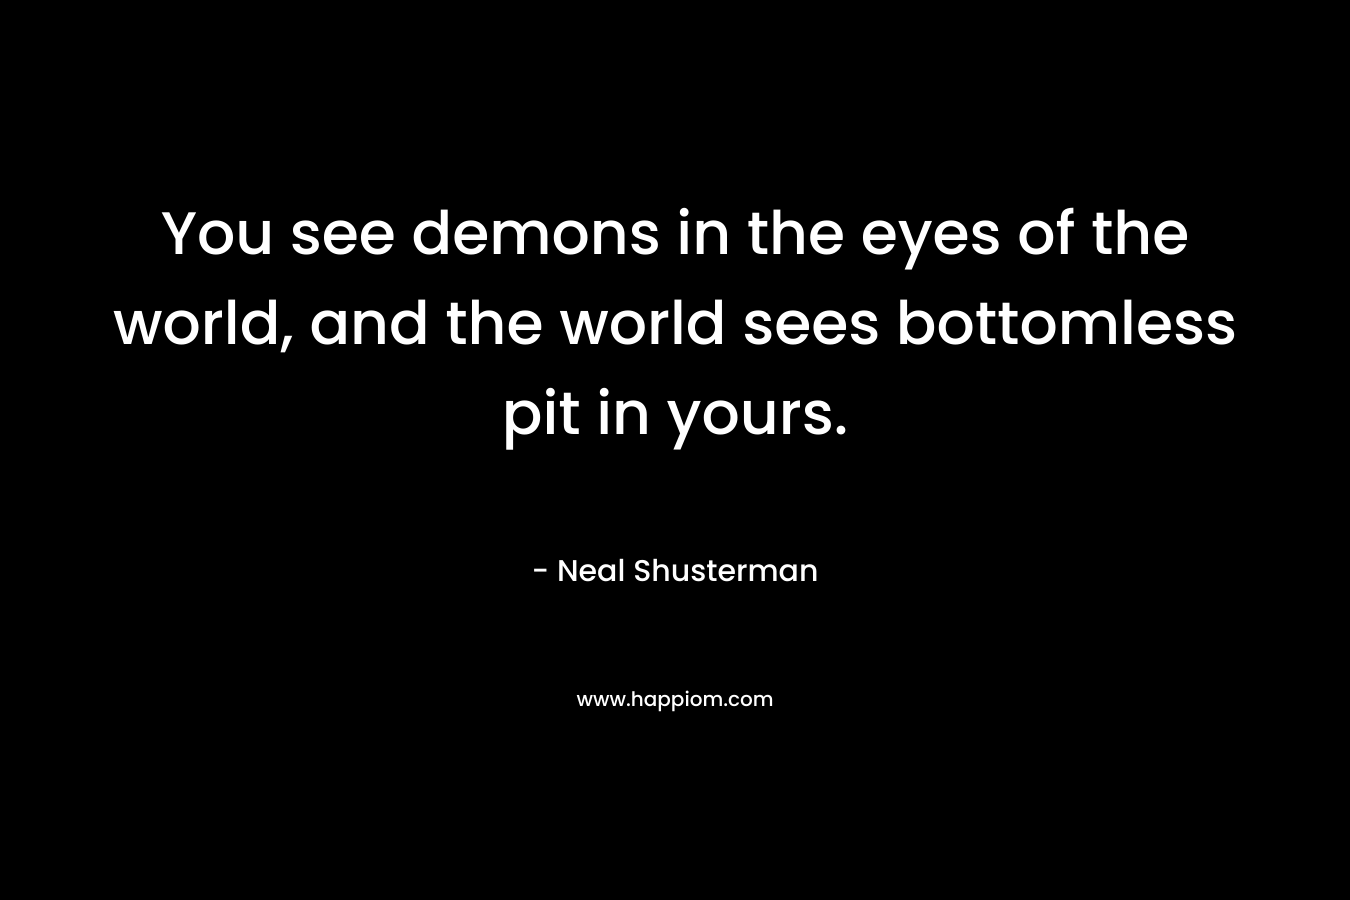 You see demons in the eyes of the world, and the world sees bottomless pit in yours.